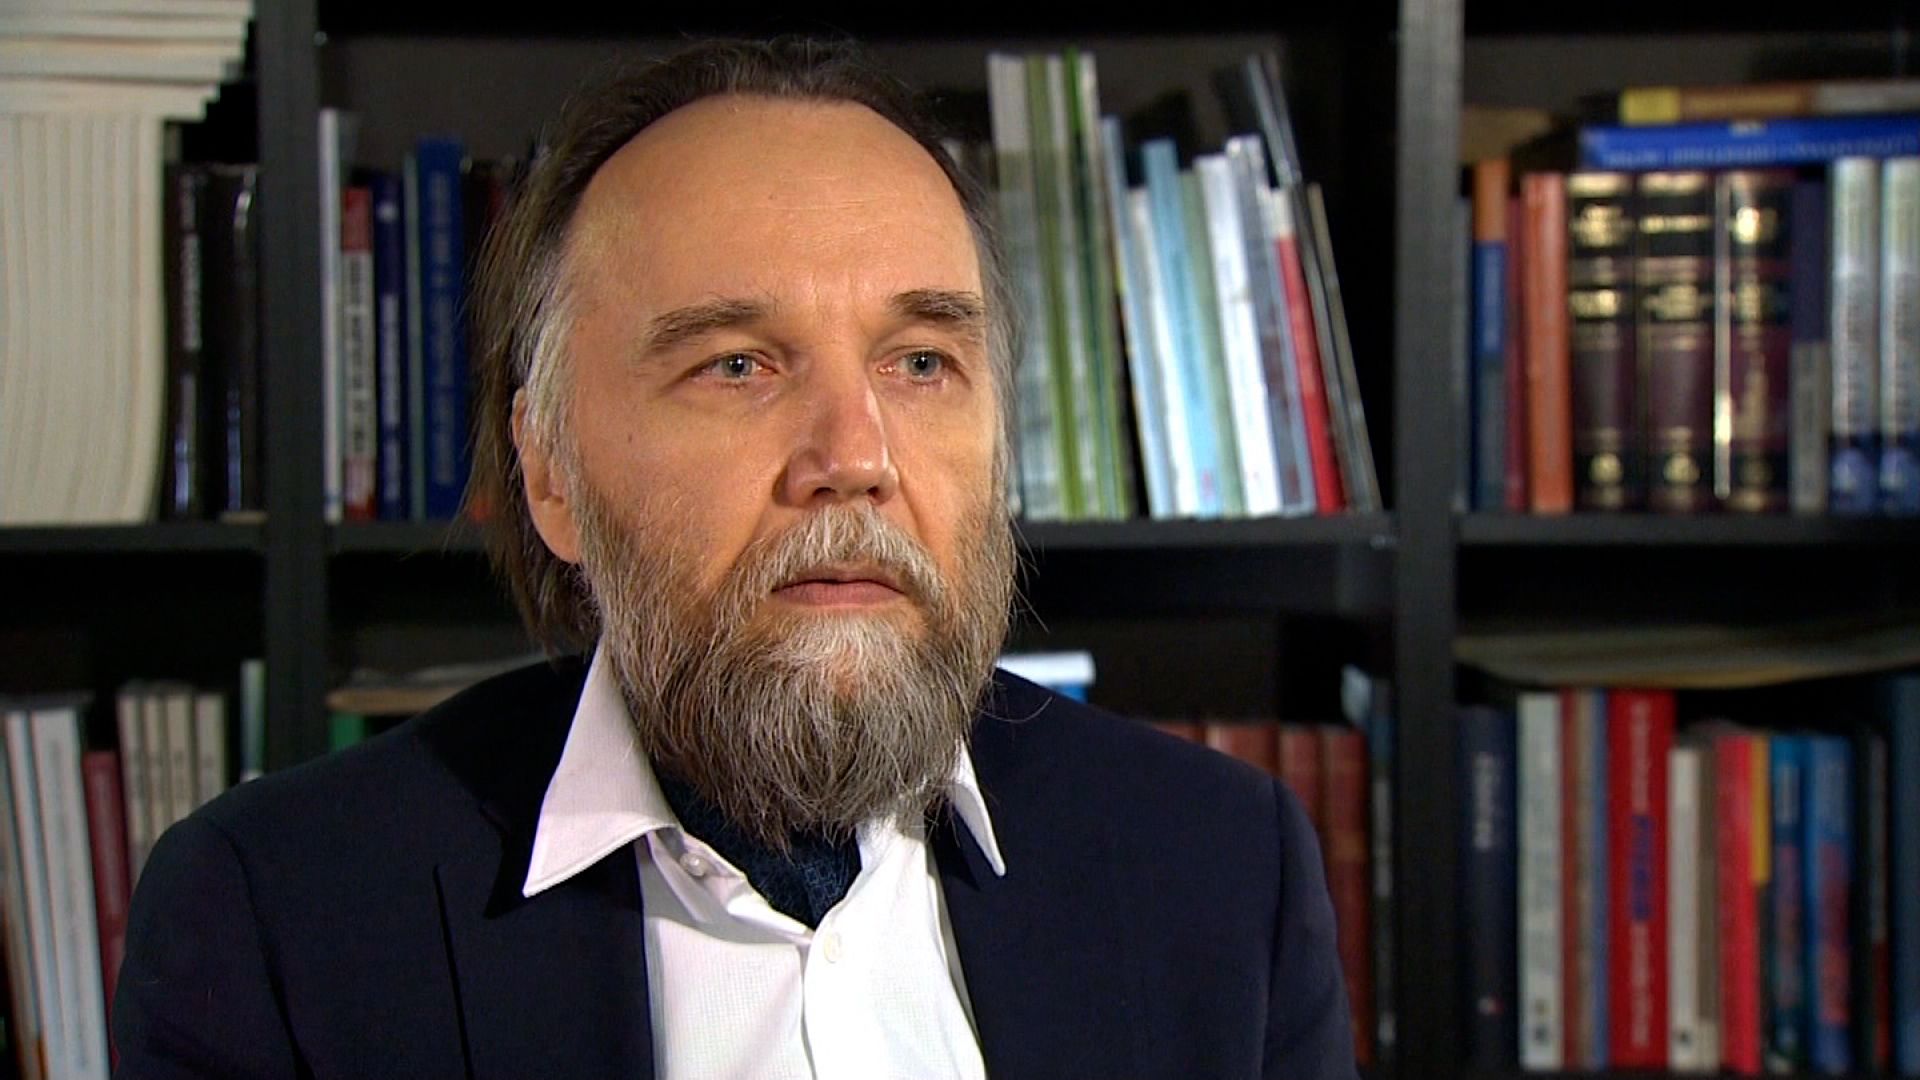 Who is Alexander Dugin, the high priest of a virulent brand of Russian nationalism? | CNN